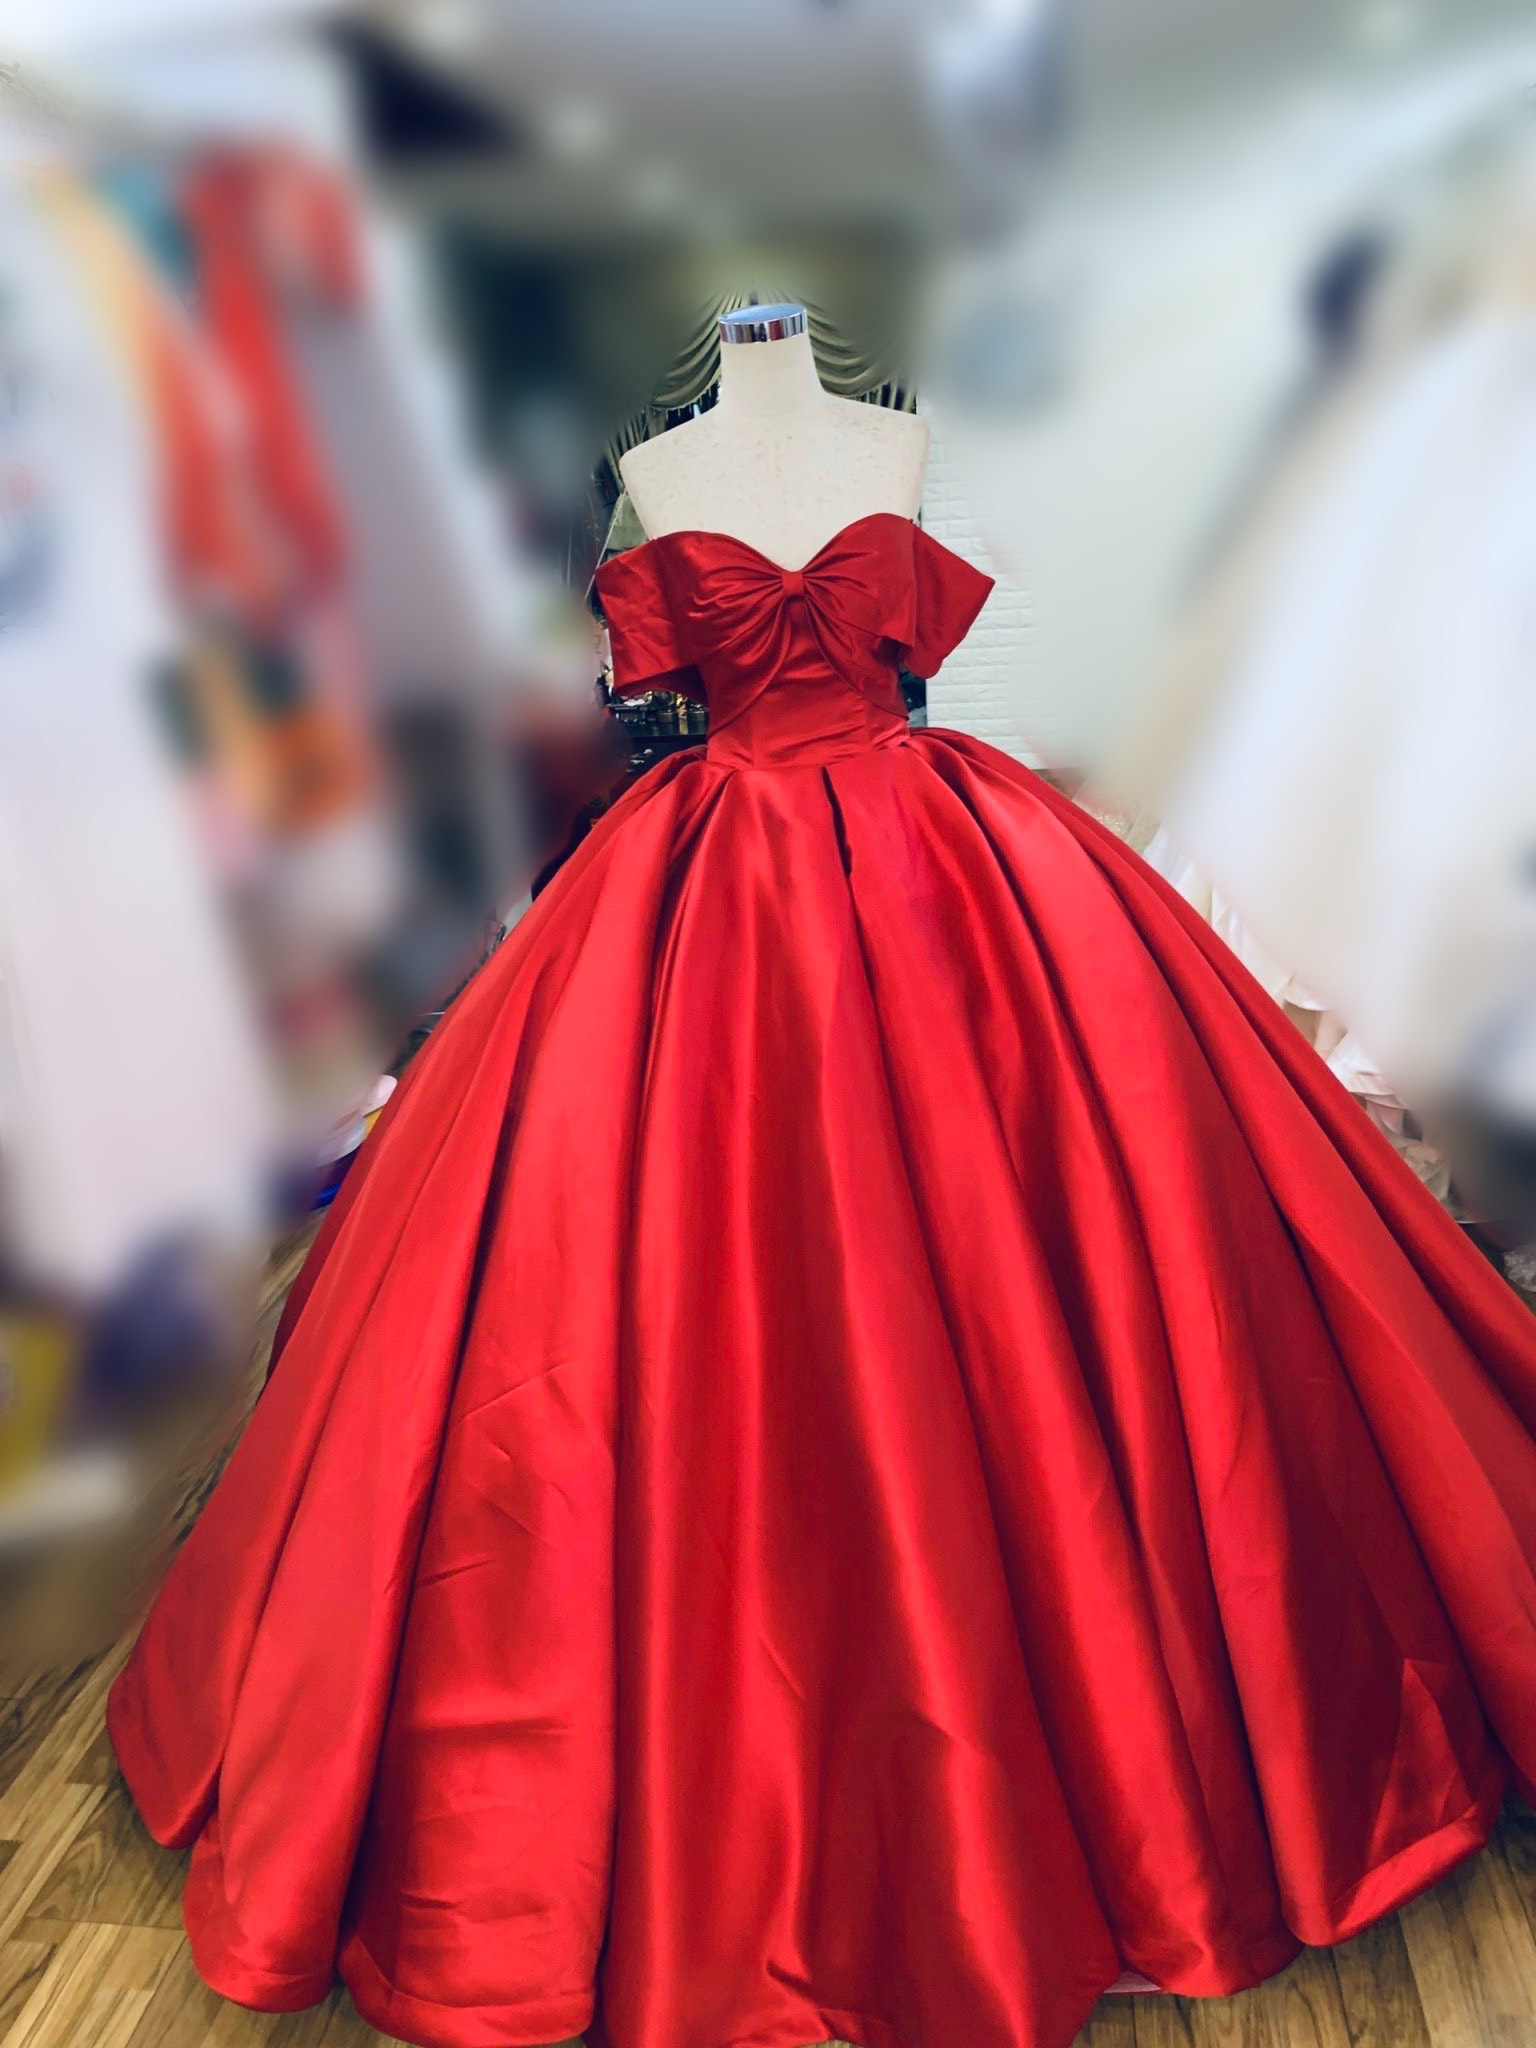 Buy THE LONDON STORE Women's Red Organza & Satin Wedding Ball Gown Dresses  (14) at Amazon.in